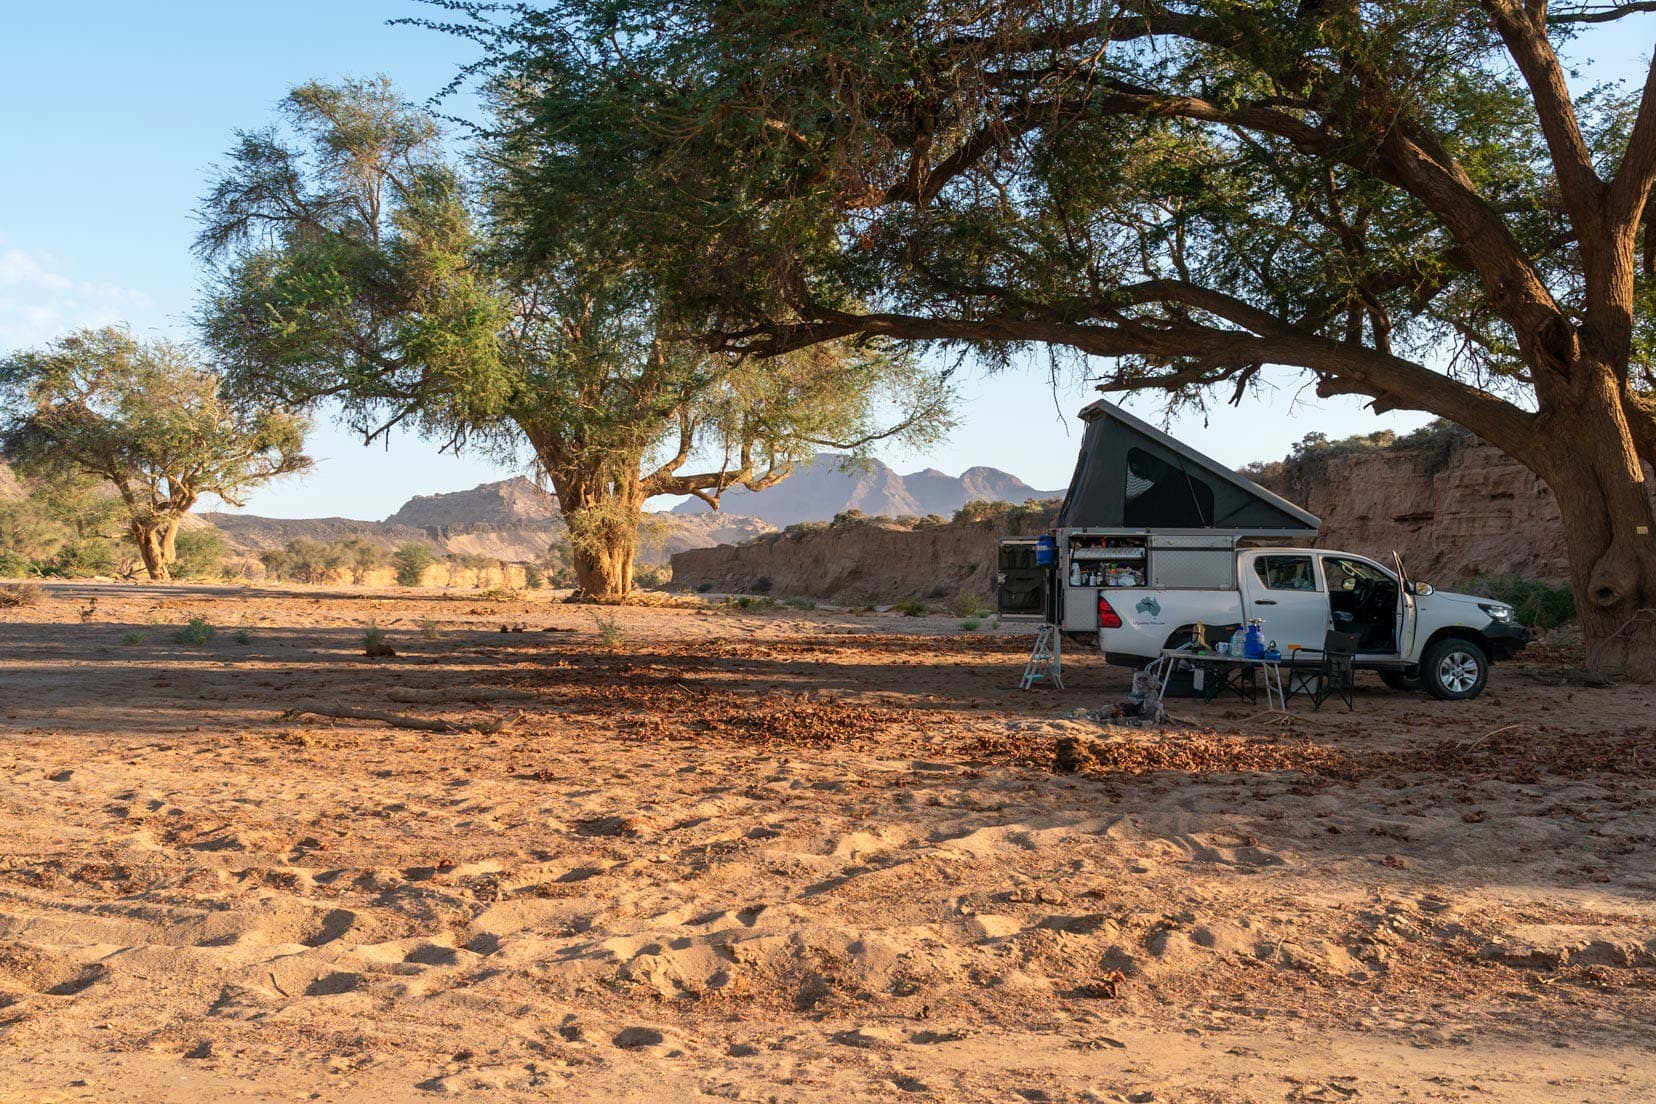 Huab River camp site in dry river bed, Namibia